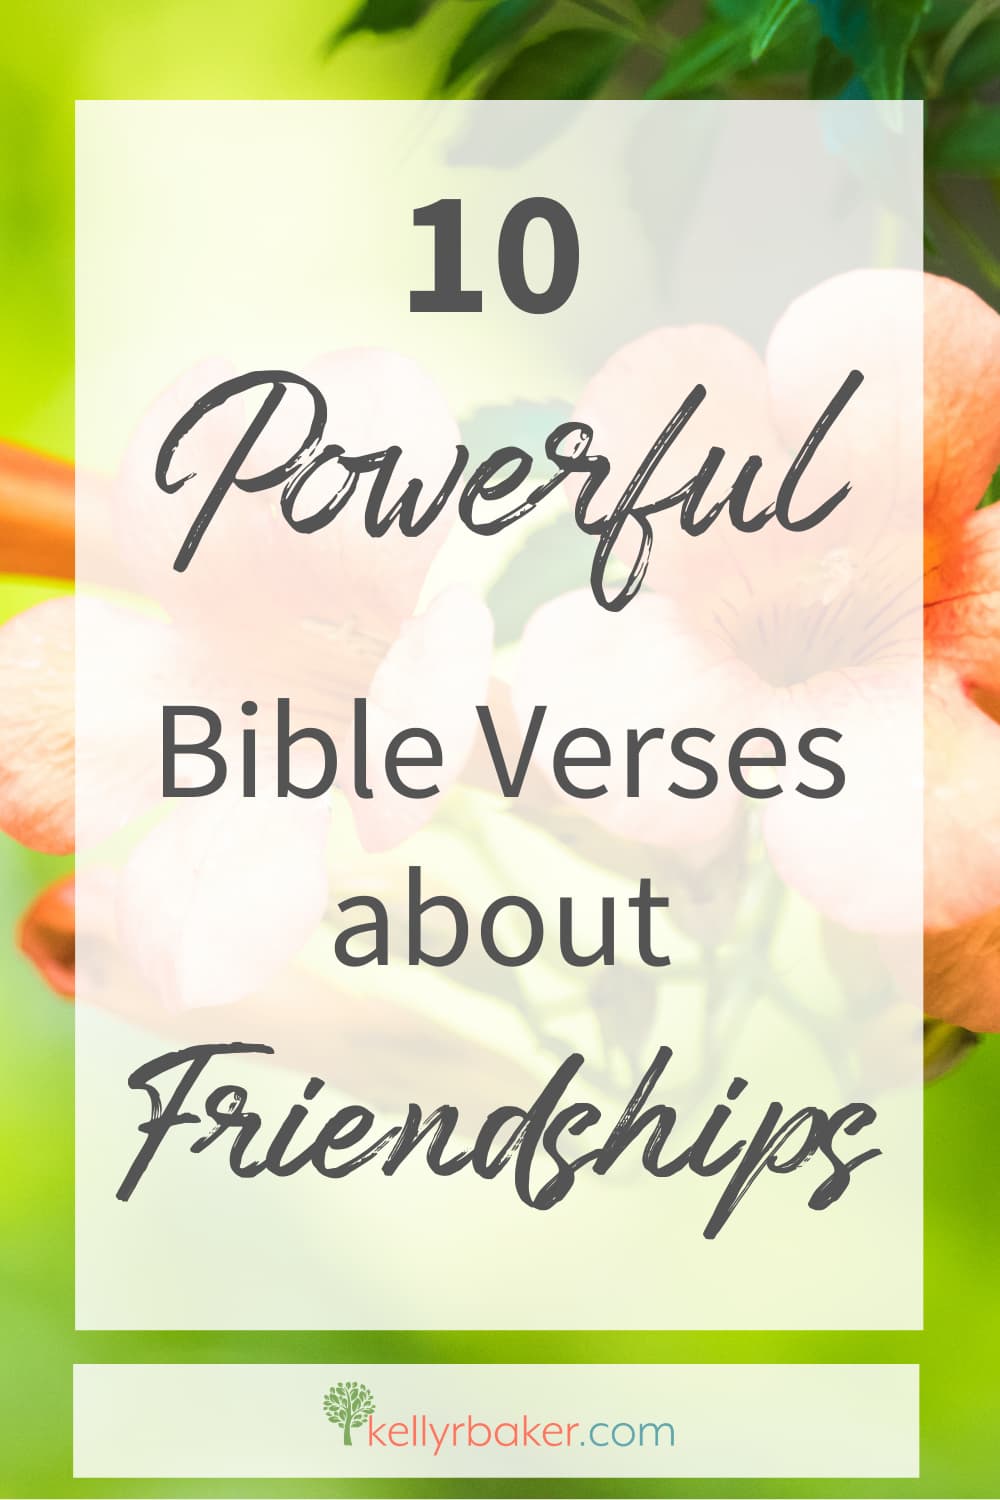 Top 10 Bible Verses About Friendship + Jesus’ Example